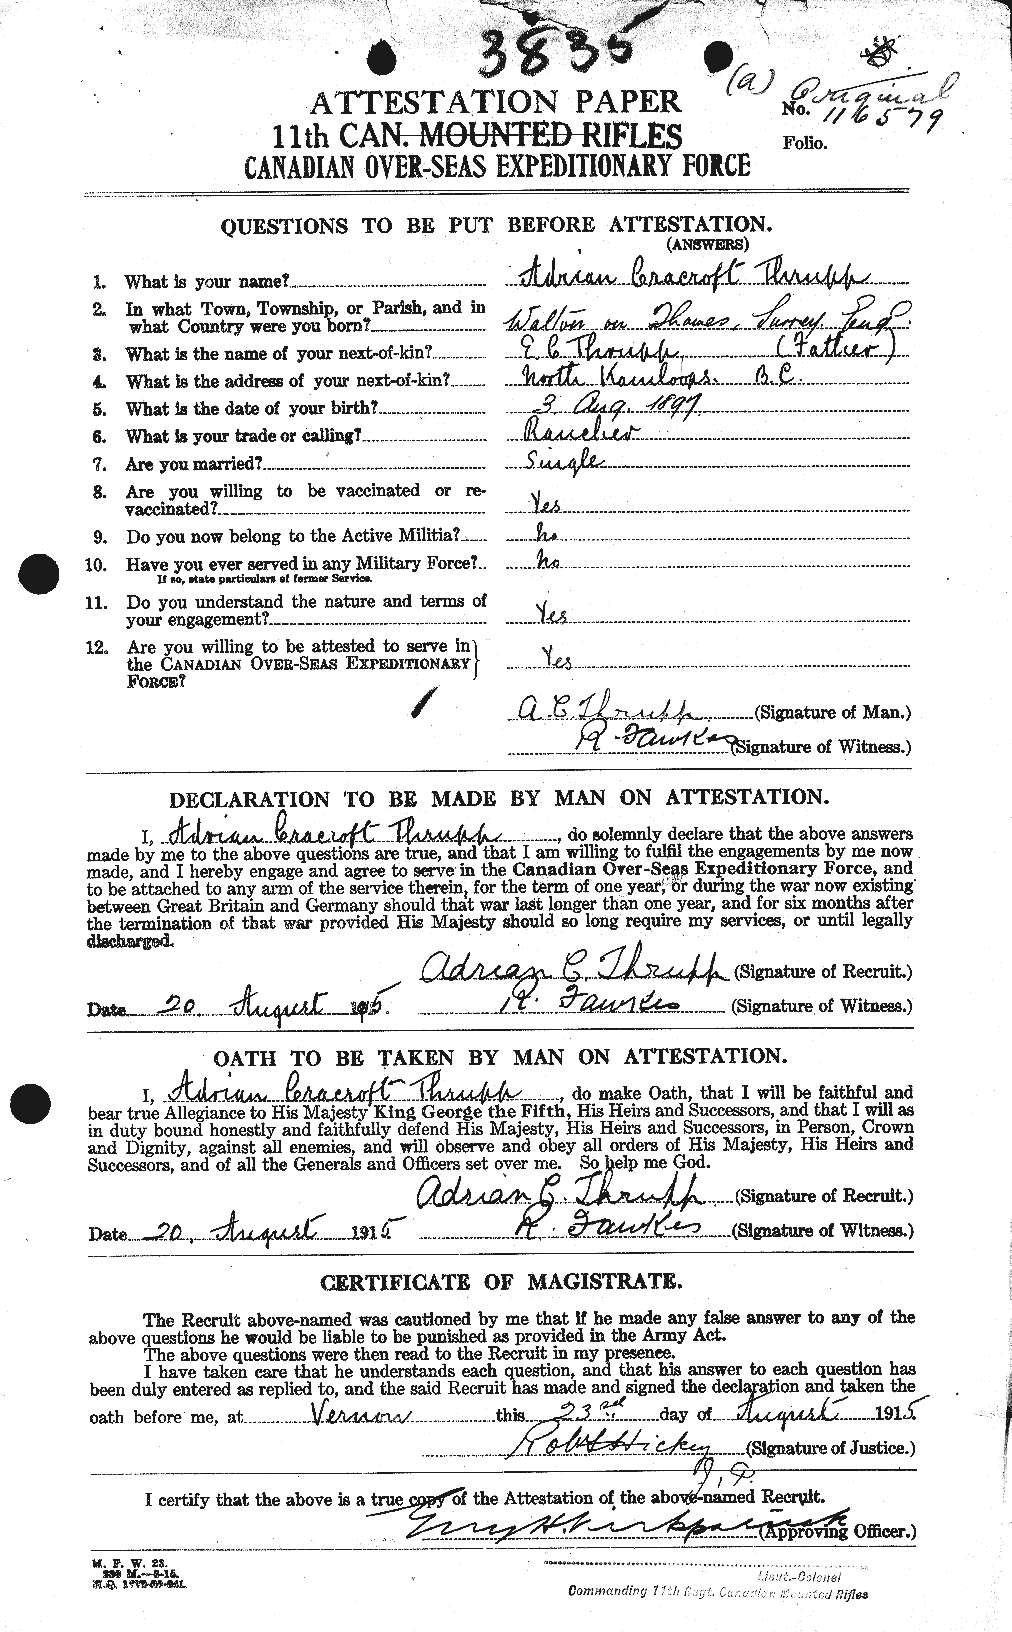 Personnel Records of the First World War - CEF 635168a